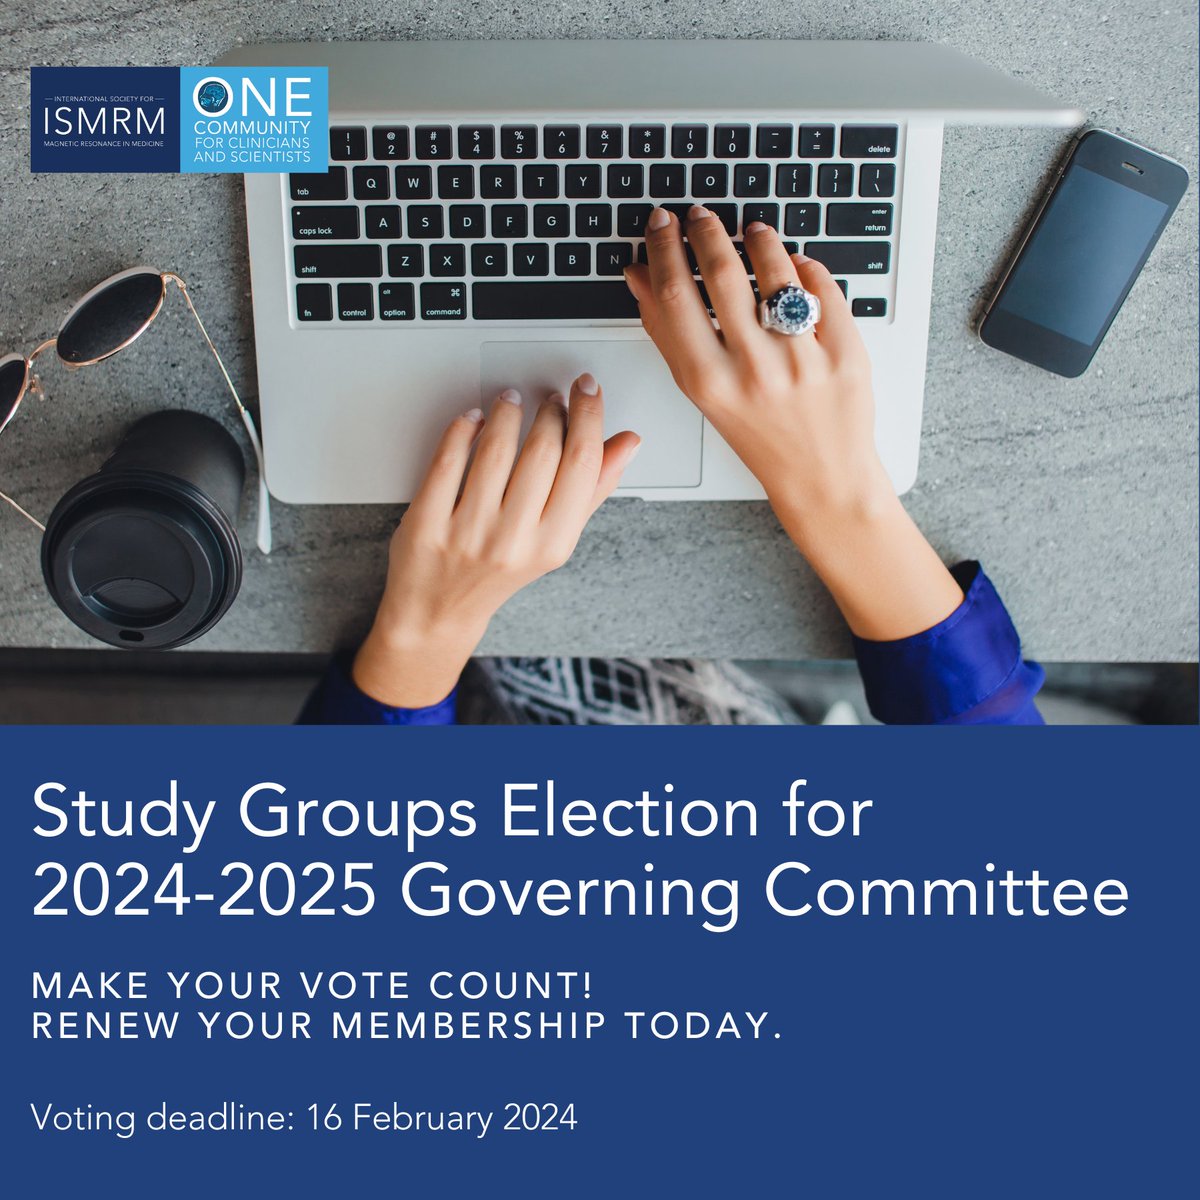 Have you voted yet? Cast your vote for the Study Groups Election for the 2024-2025 Governing Committee! Renew your membership to make sure your vote counts. Study Group pages have links for each forum post for ballots. View all Study Groups: ow.ly/HfRK50QsL8N